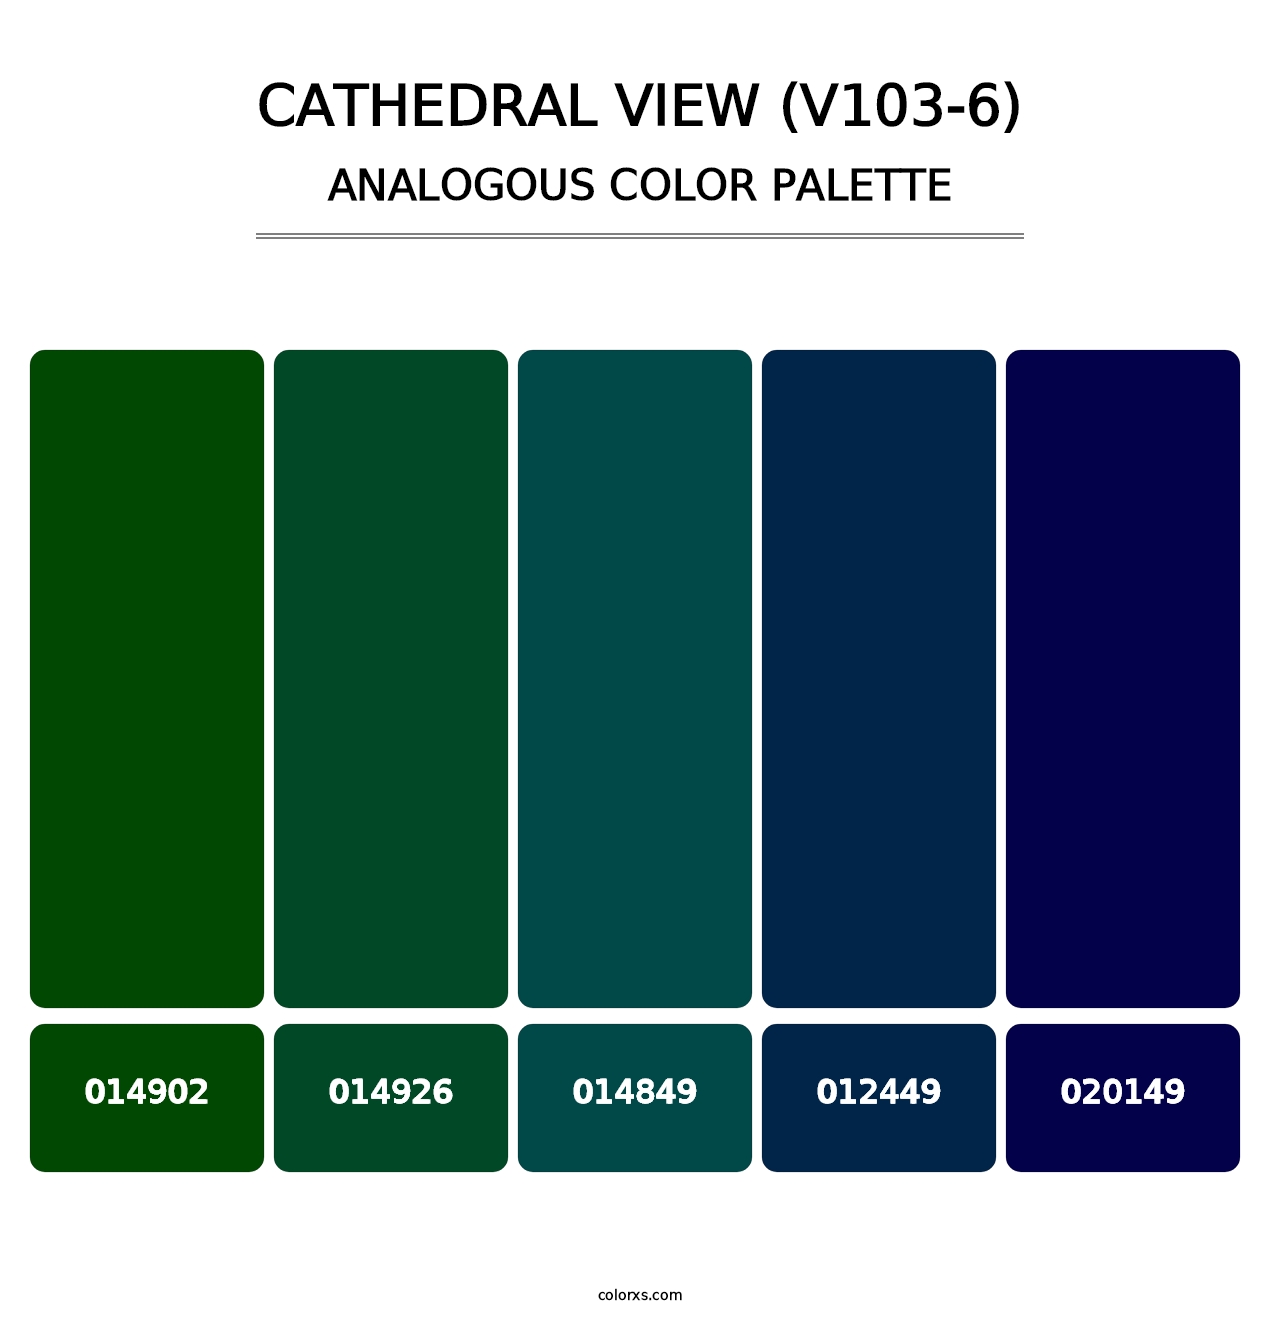 Cathedral View (V103-6) - Analogous Color Palette